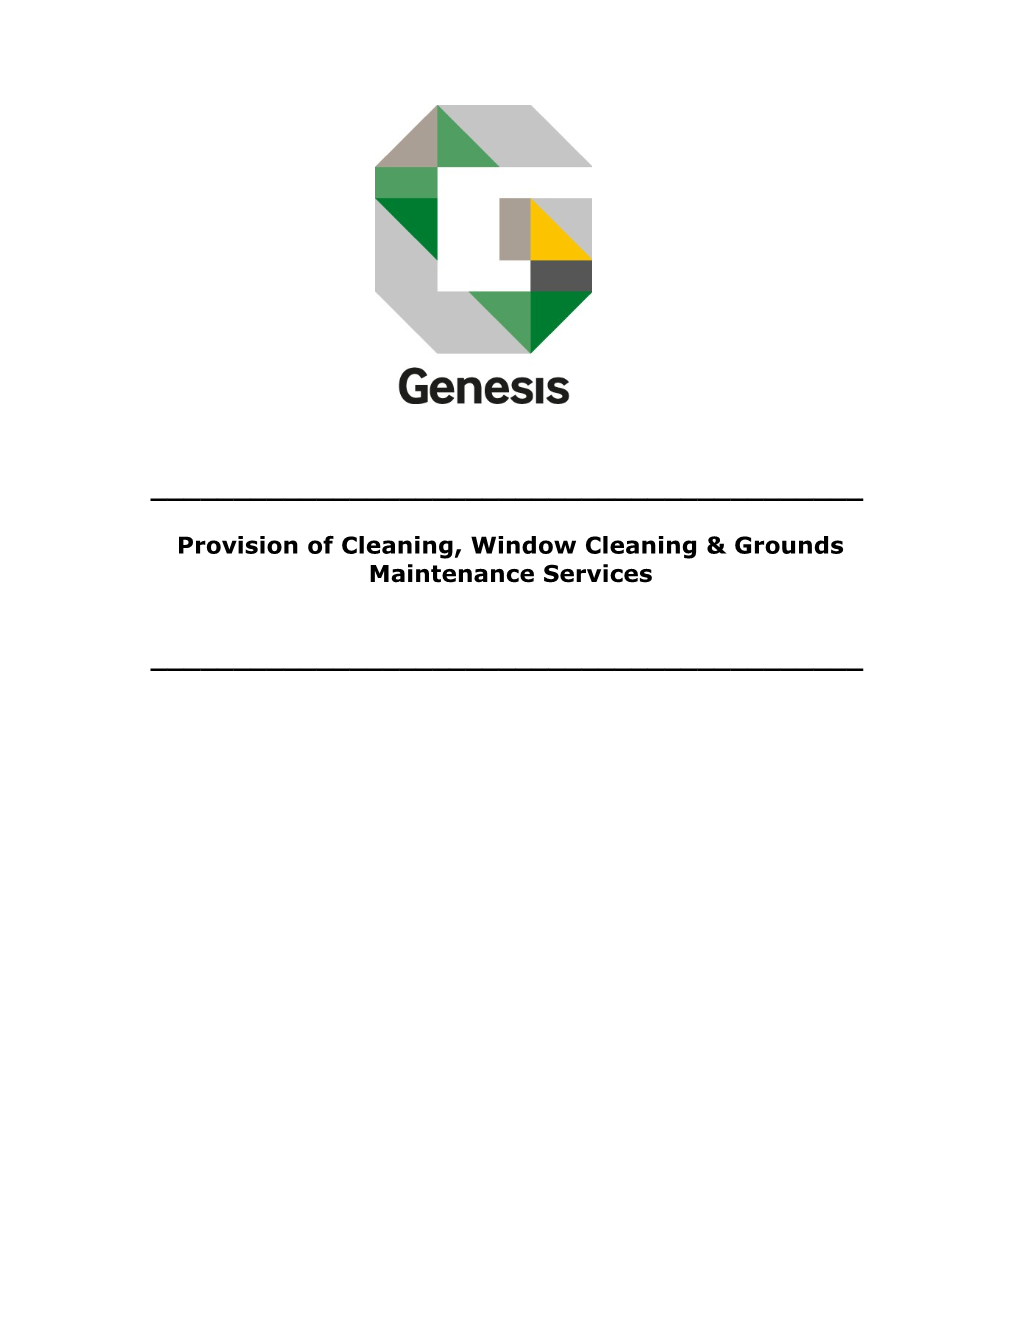 Provision of Cleaning, Window Cleaning & Grounds Maintenance Services